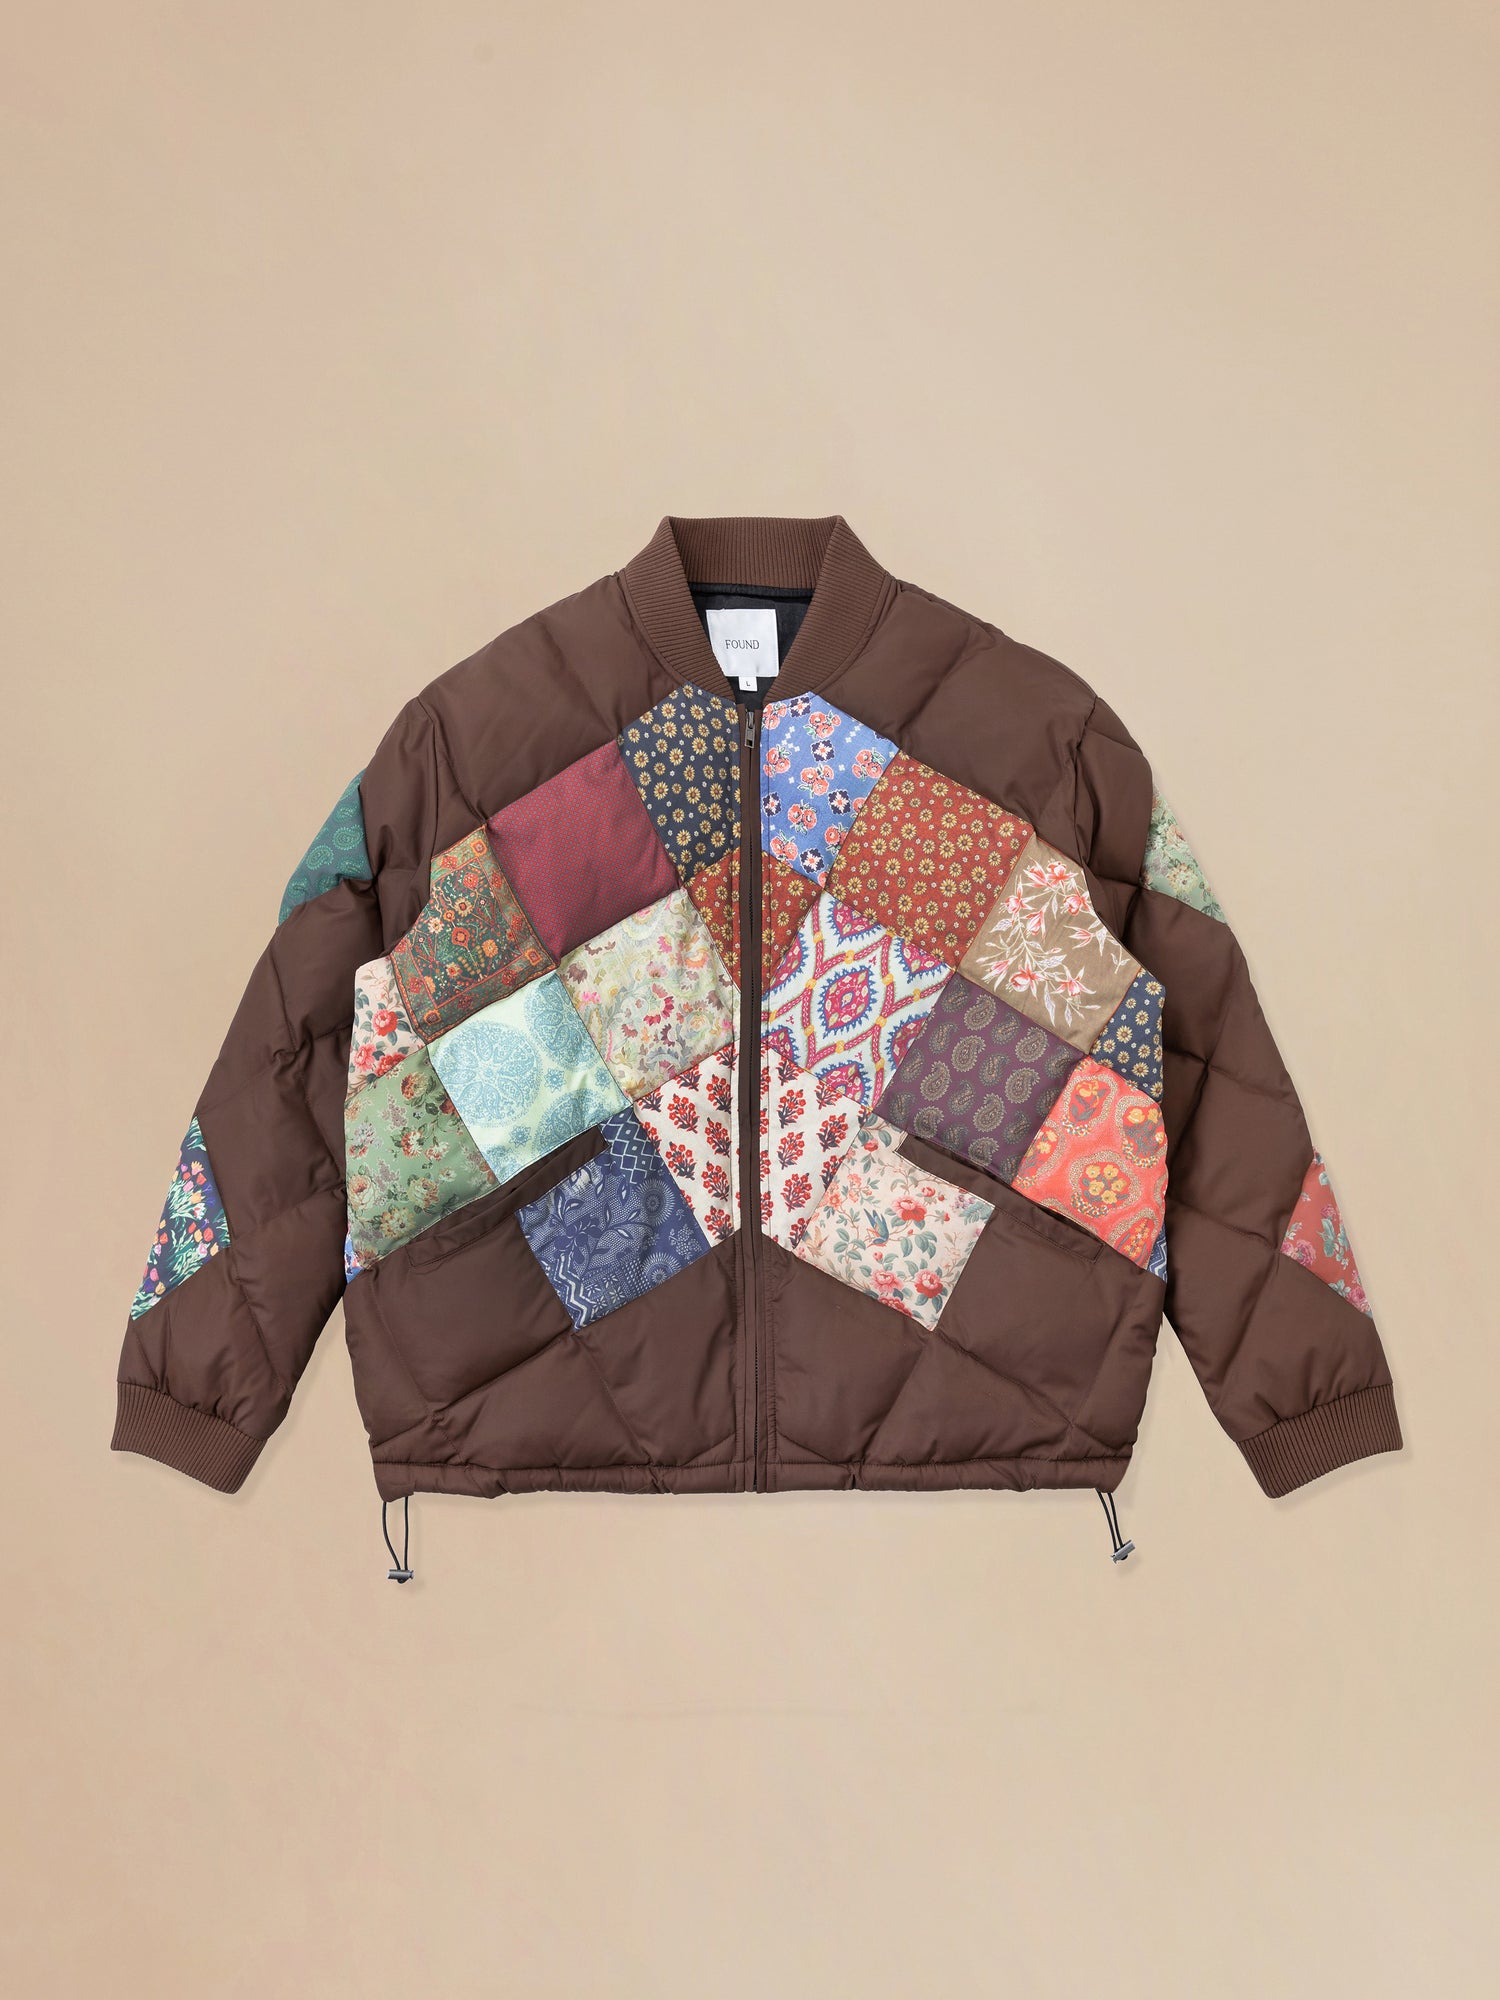 A Found Diamond Quilt Patchwork Jacket with South Asian prints.